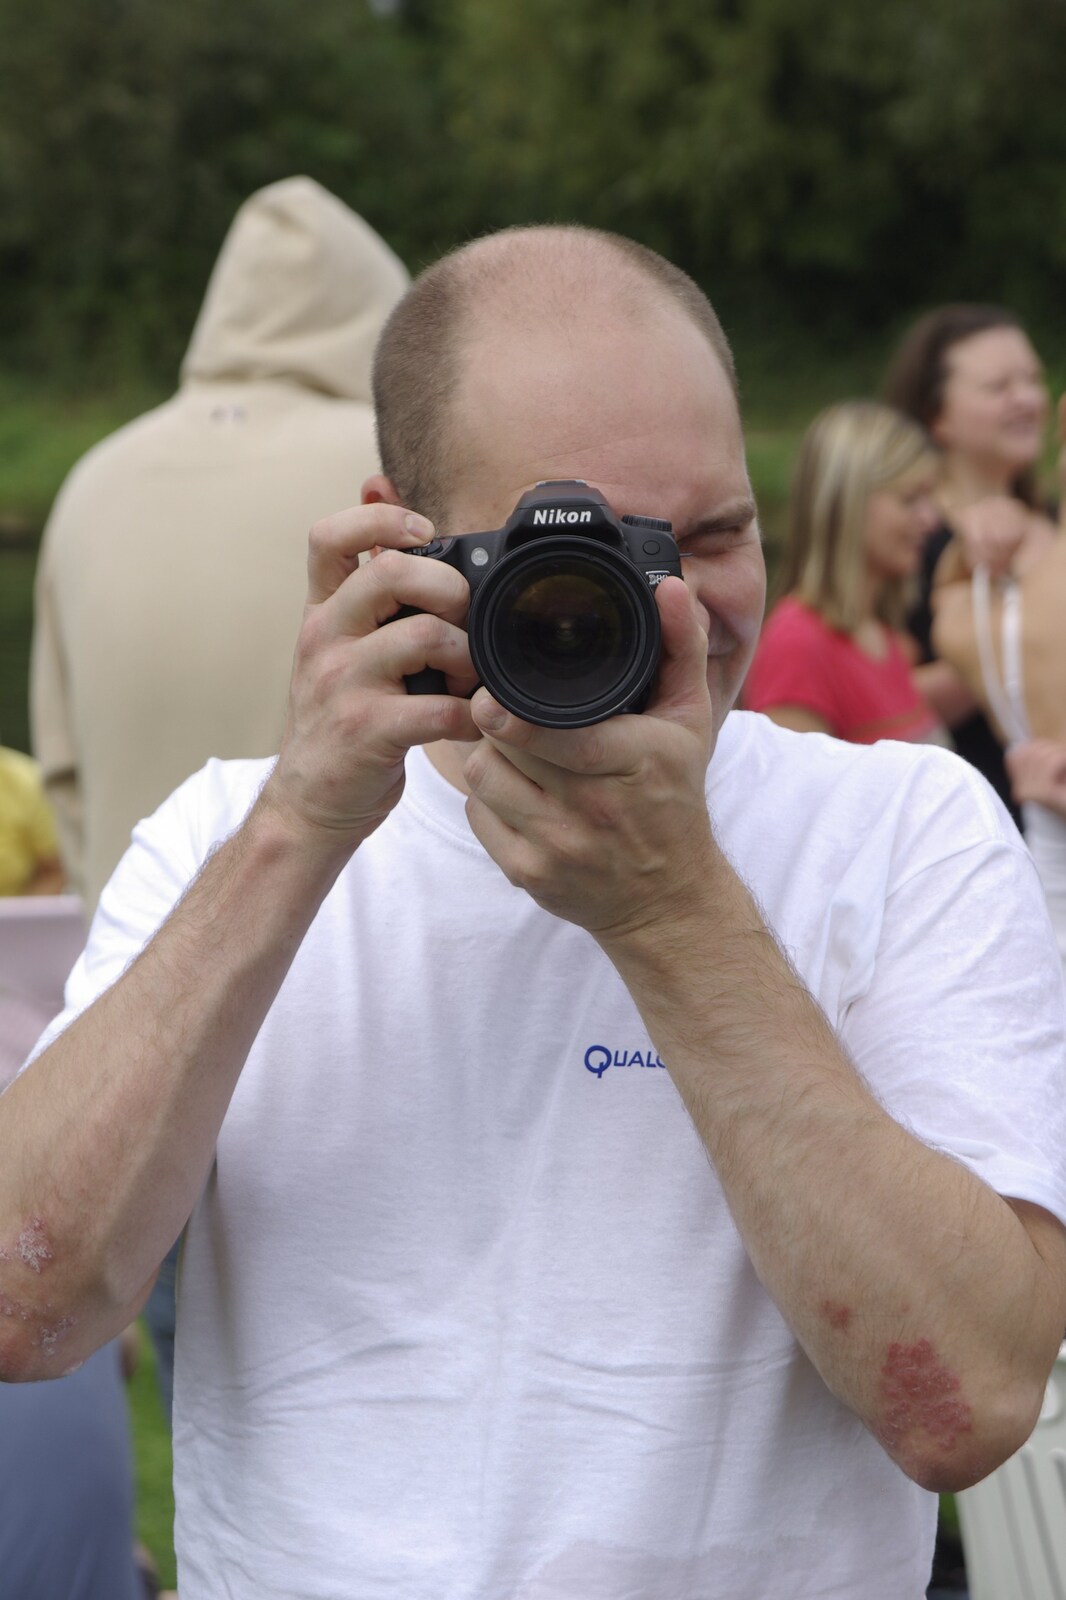 Qualcomm's Dragon-Boat Racing, Fen Ditton, Cambridge - 8th September 2007: Francis takes a photo of Nosher taking a photo of Francis